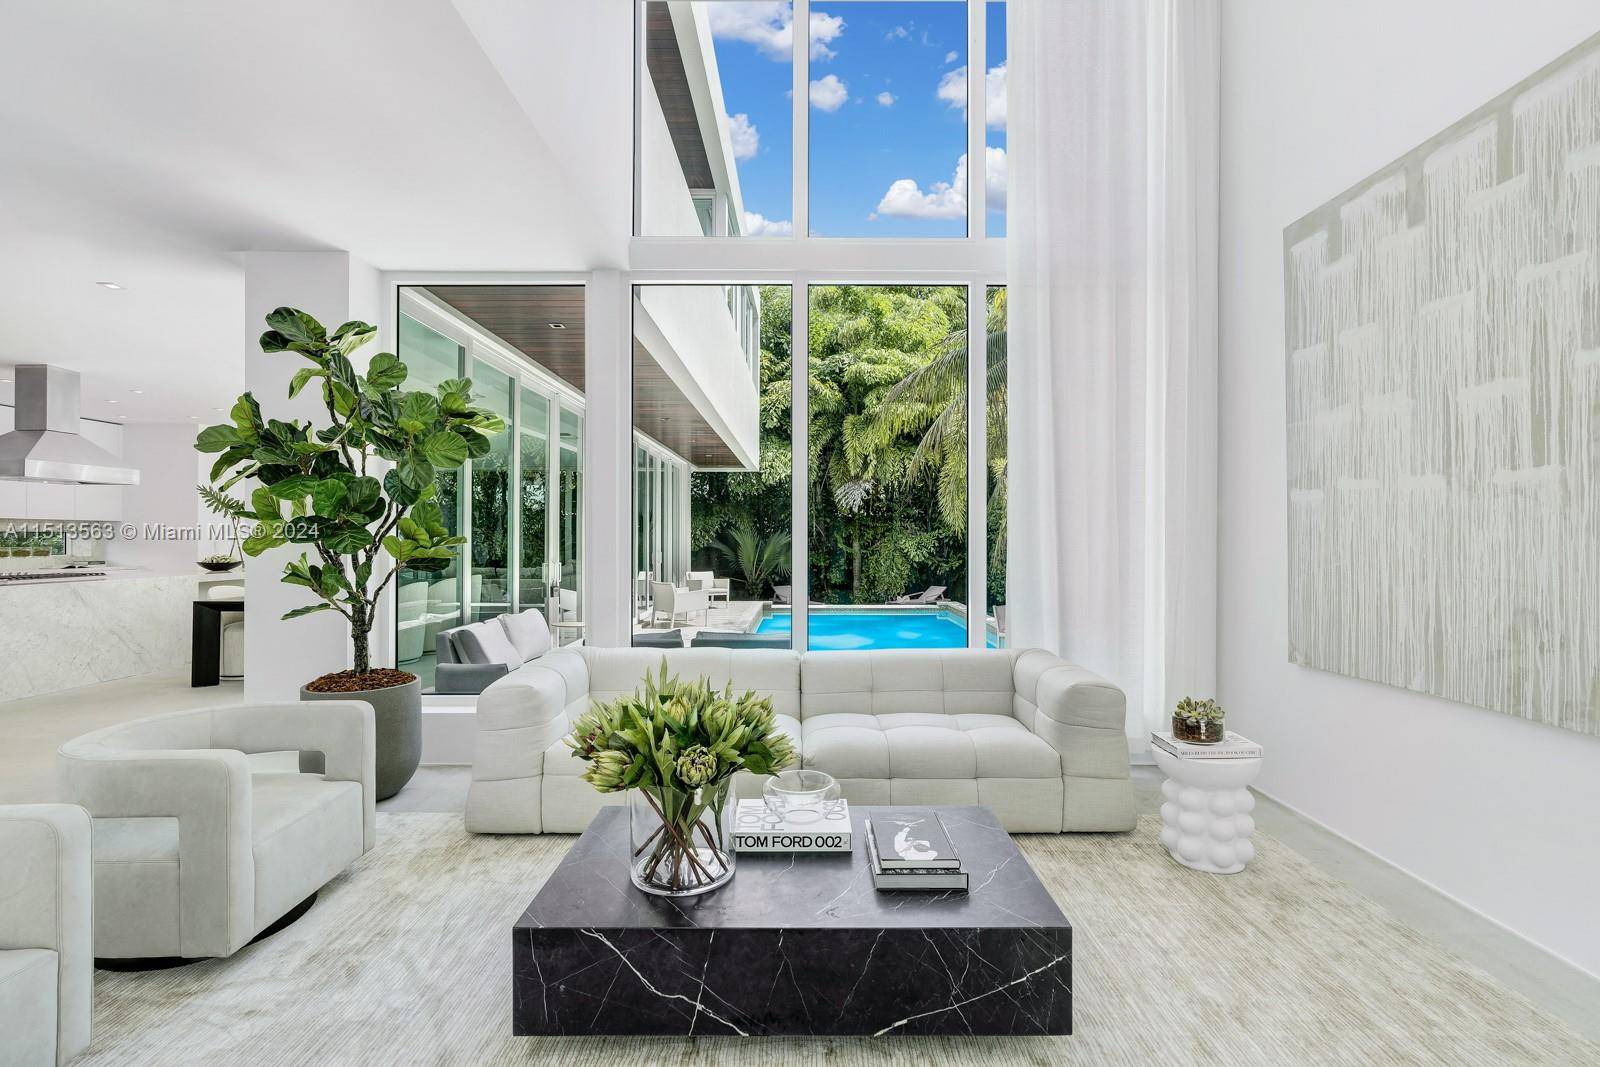 Step Inside With Me ! Embraced by walls of glass, this ultra contemporary residence by Todd Glaser with architecture by DOMO greets with 18' ceilings enviable natural light.